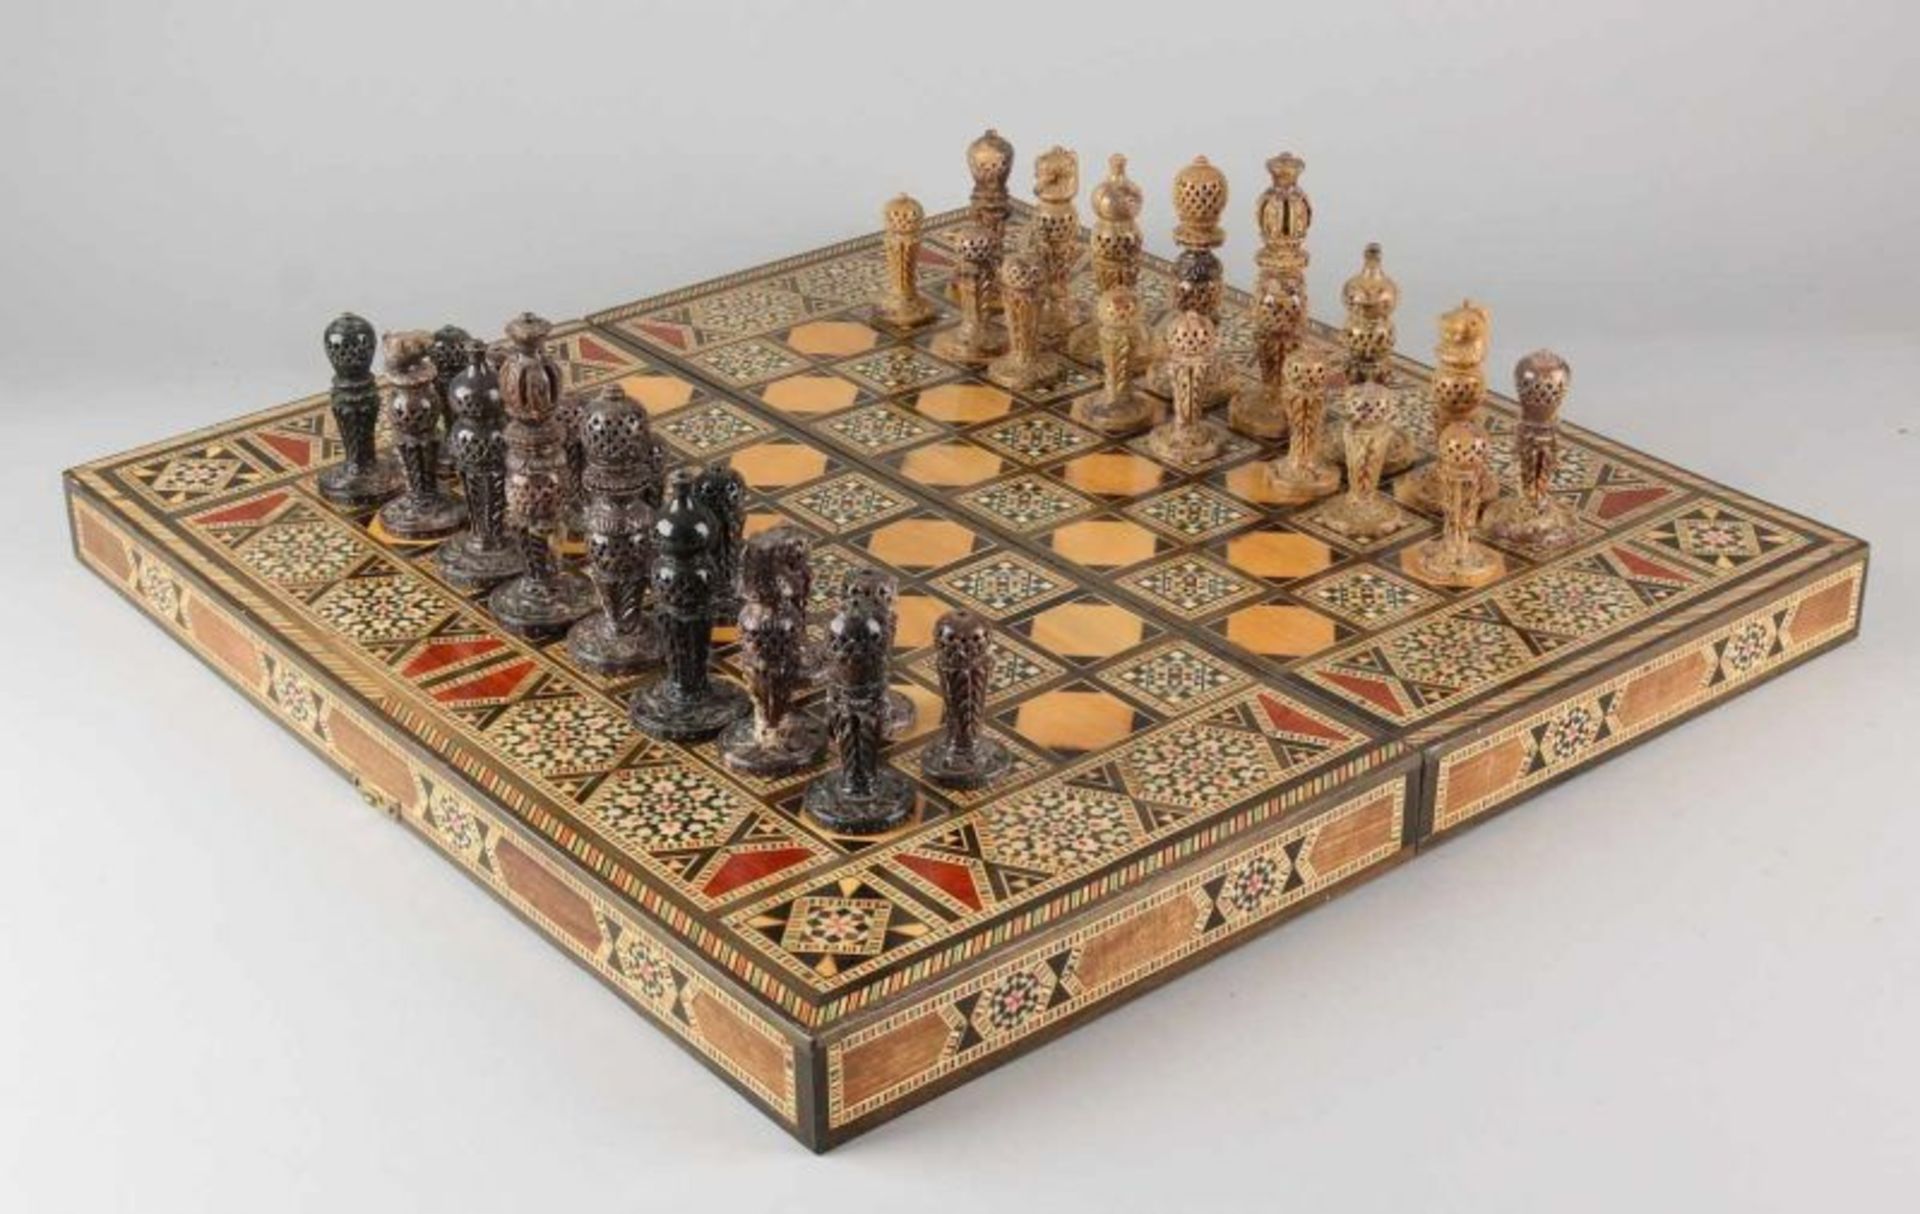 Eastern soapstone chess with intarsia chessboard. Morocco / Turkey. Size: 16 x 50 x 50 cm. In good